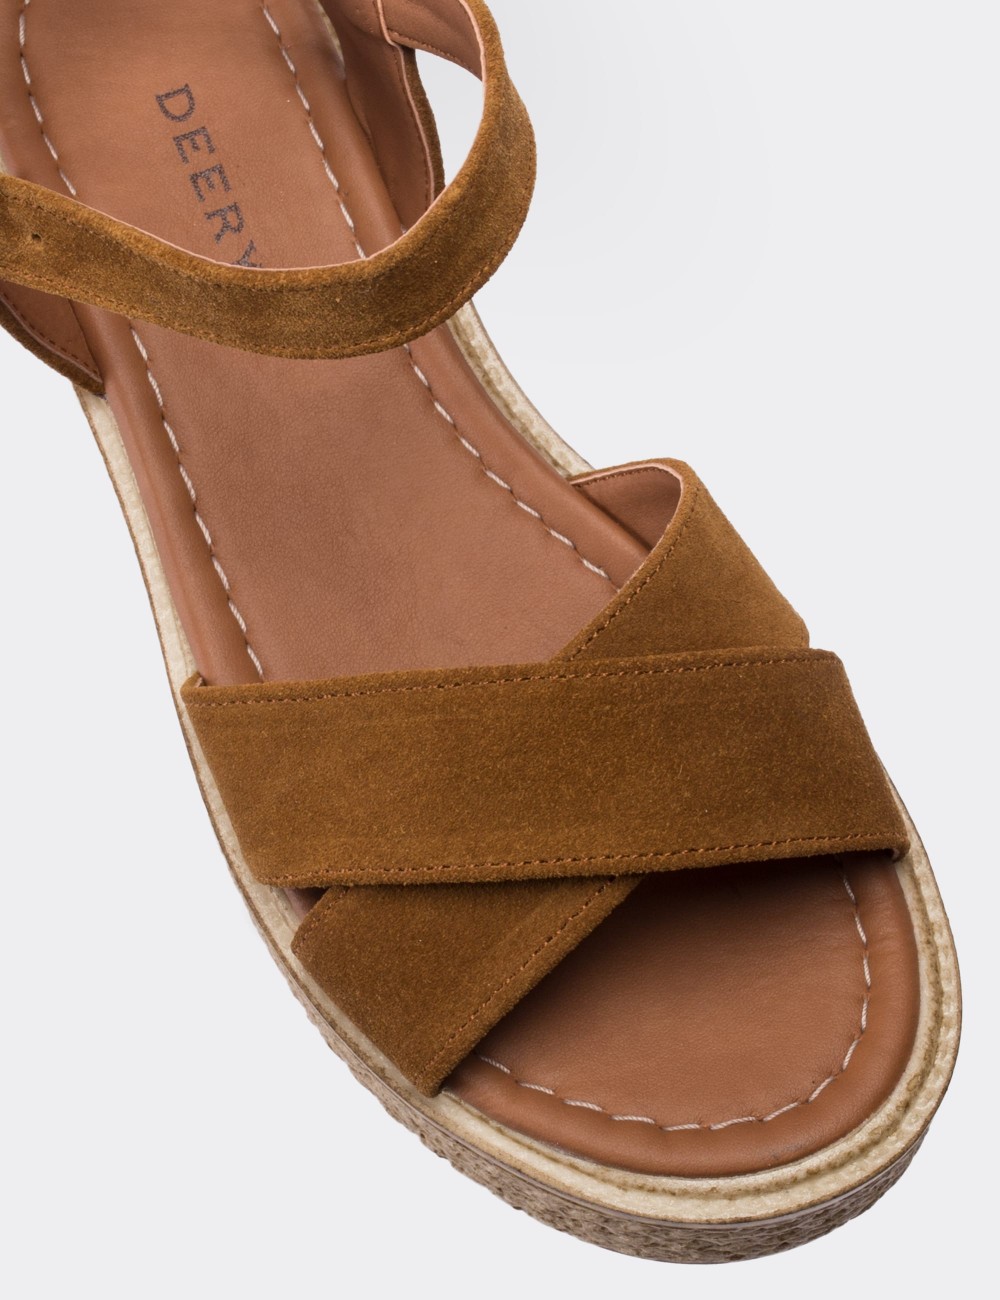 Tan Suede Leather Sandals - B0500ZTBAP01